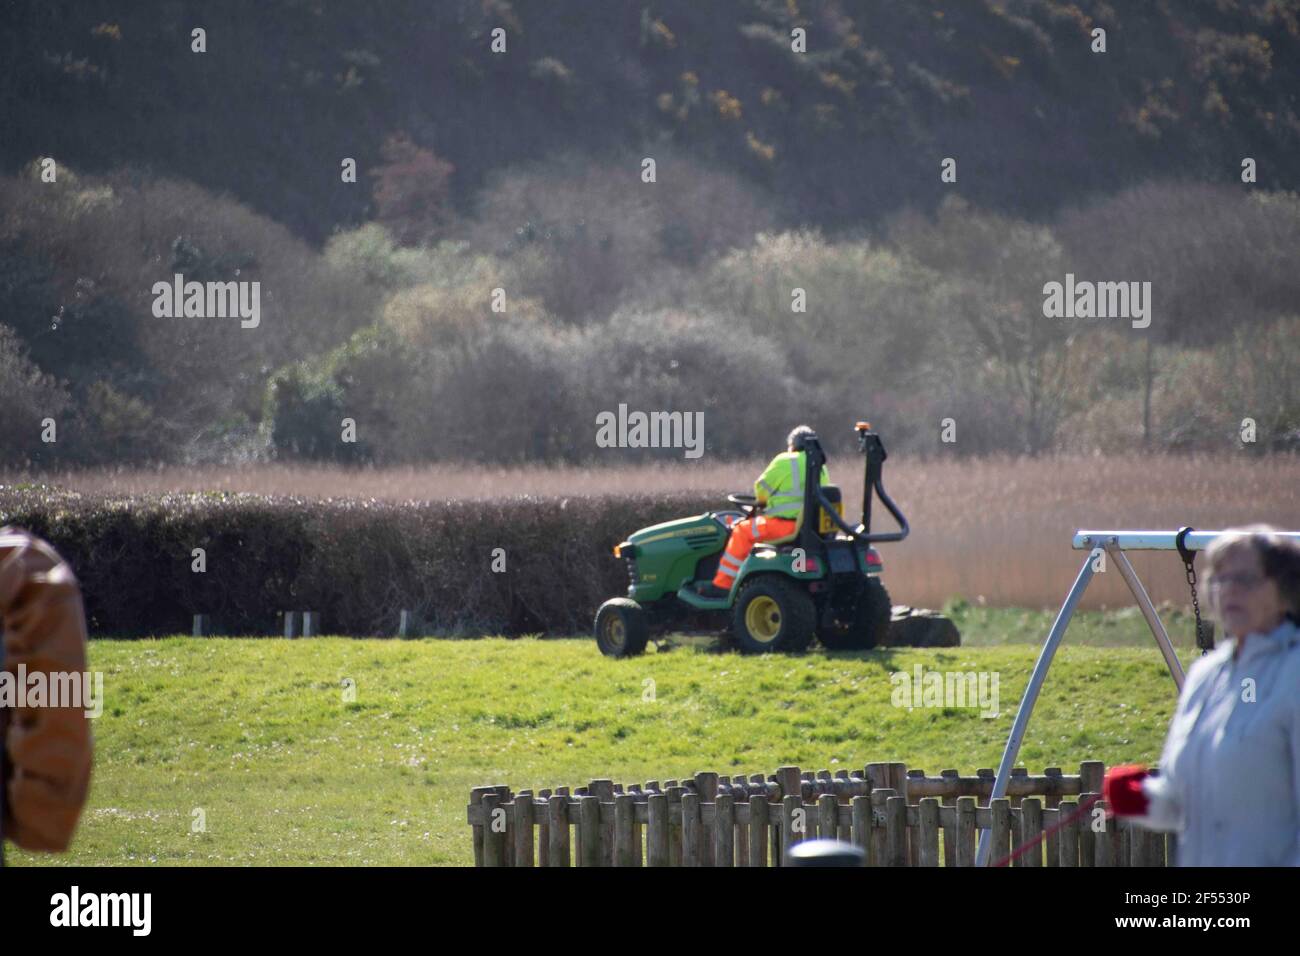 Fishguard, Pembrokeshire, uk .24 March  2021. Workers in their  high vis jackets ride  on grass cutters  as  more visitors  arrive ,Pembrokeshire County Council therefore has a difficult  to strike a balance as some cutting is essential for safety purposes, yet it is very keen to see al wild wildlife thrive wherever possible.  . Credit: Debra Angel/Alamy Live News Stock Photo